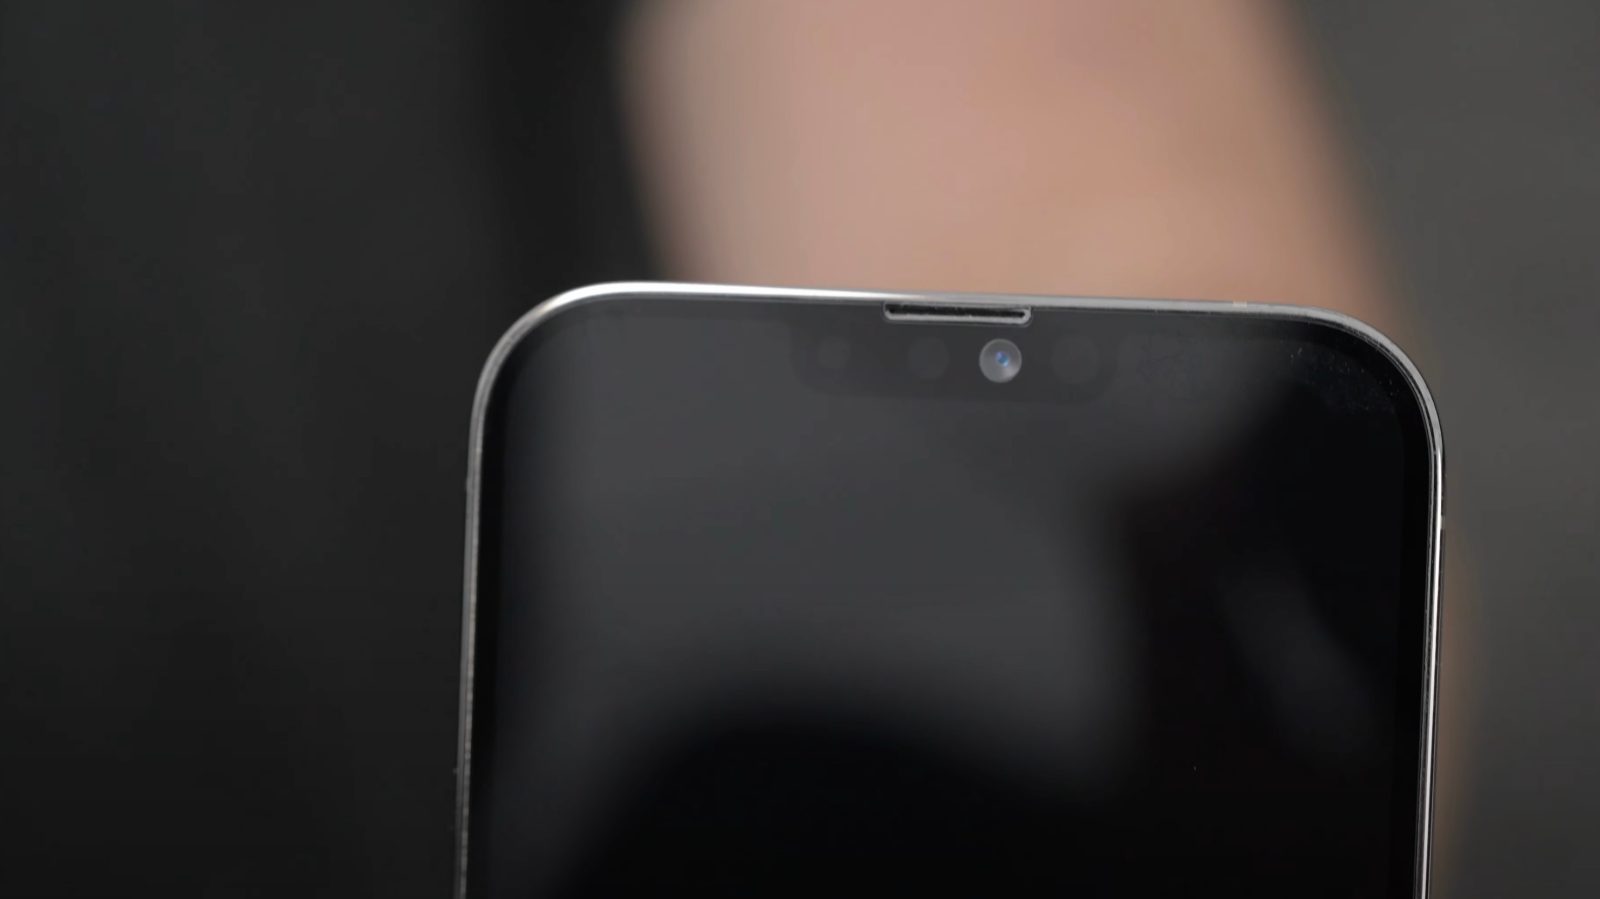 Video Iphone 13 Pro Max Dummy Unit Shows Smaller Notch With Relocated Ear Speaker 9to5mac